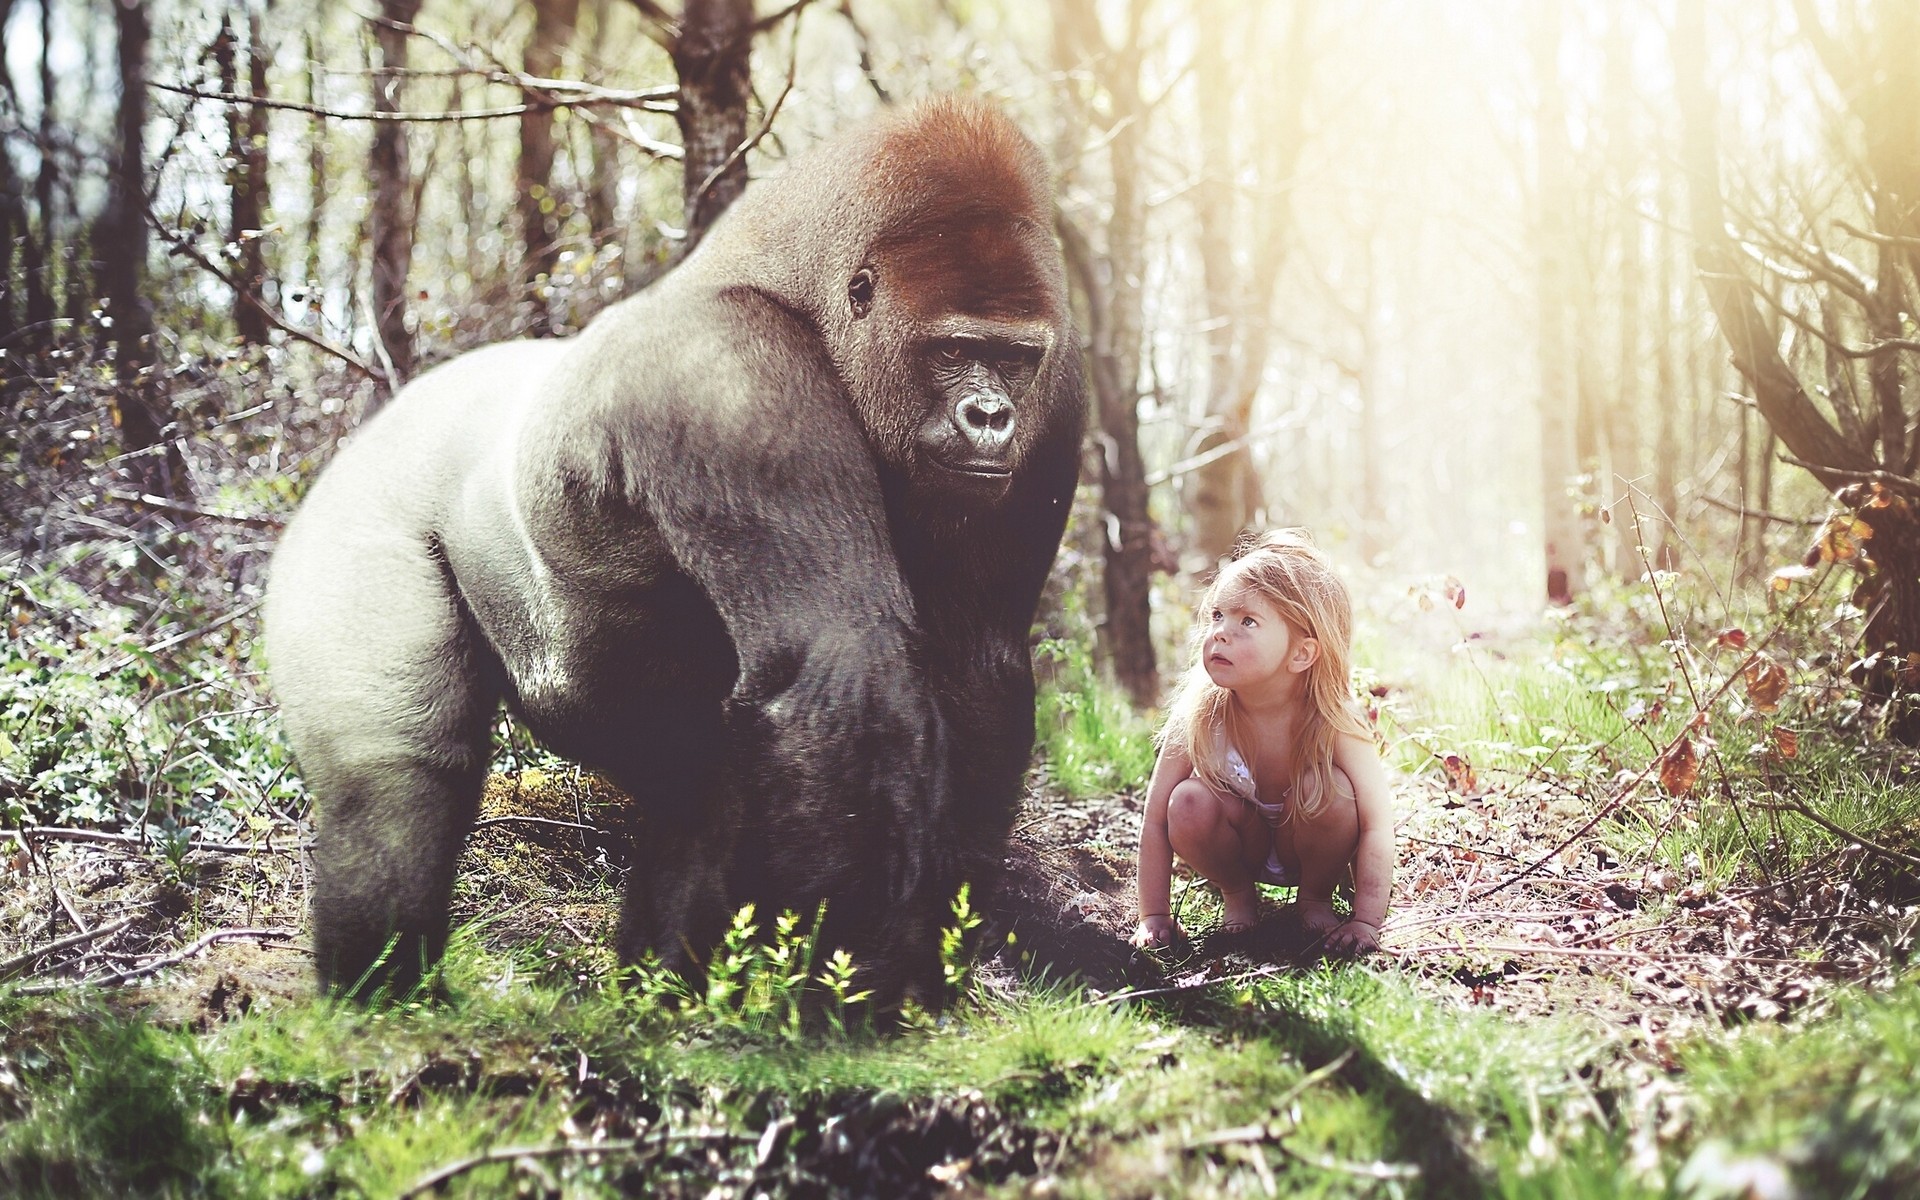 gorilla, Girl, Monkey, Forest, Situation, Girls, Humor, Funny, Cute Wallpaper